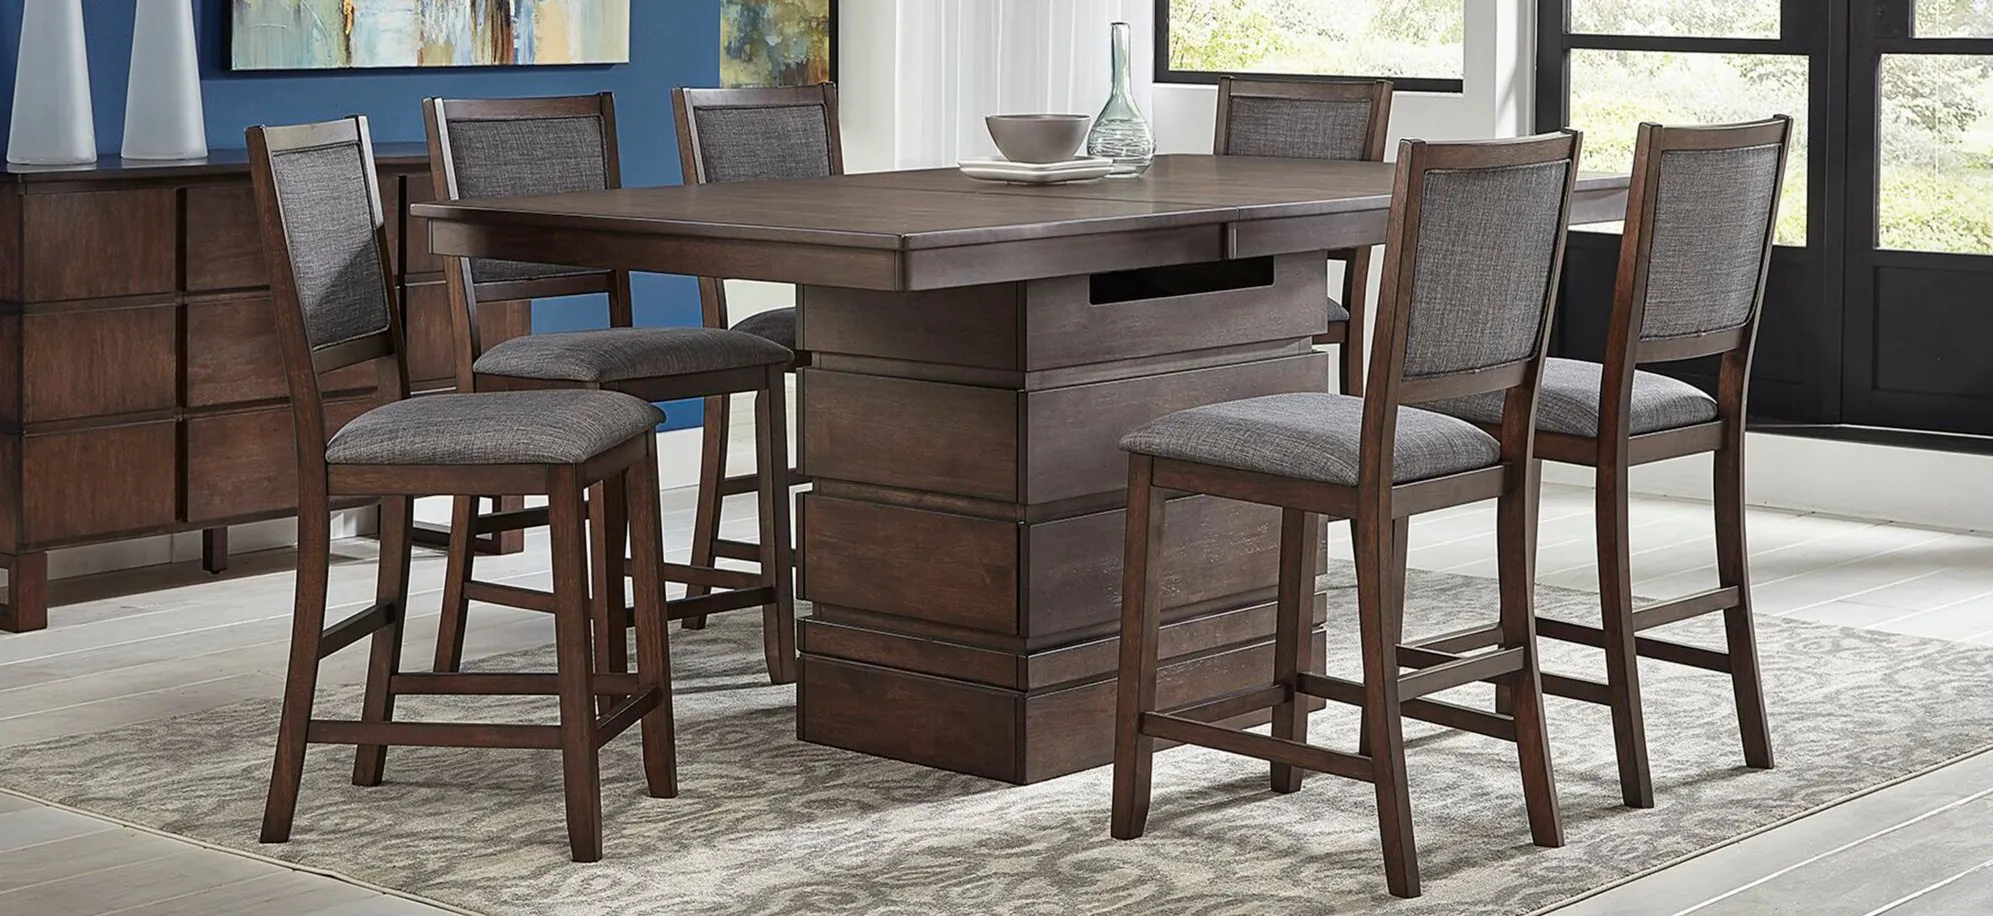 Chesney 7-pc. Counter-Height Dining Set in FALCON BROWN by A-America